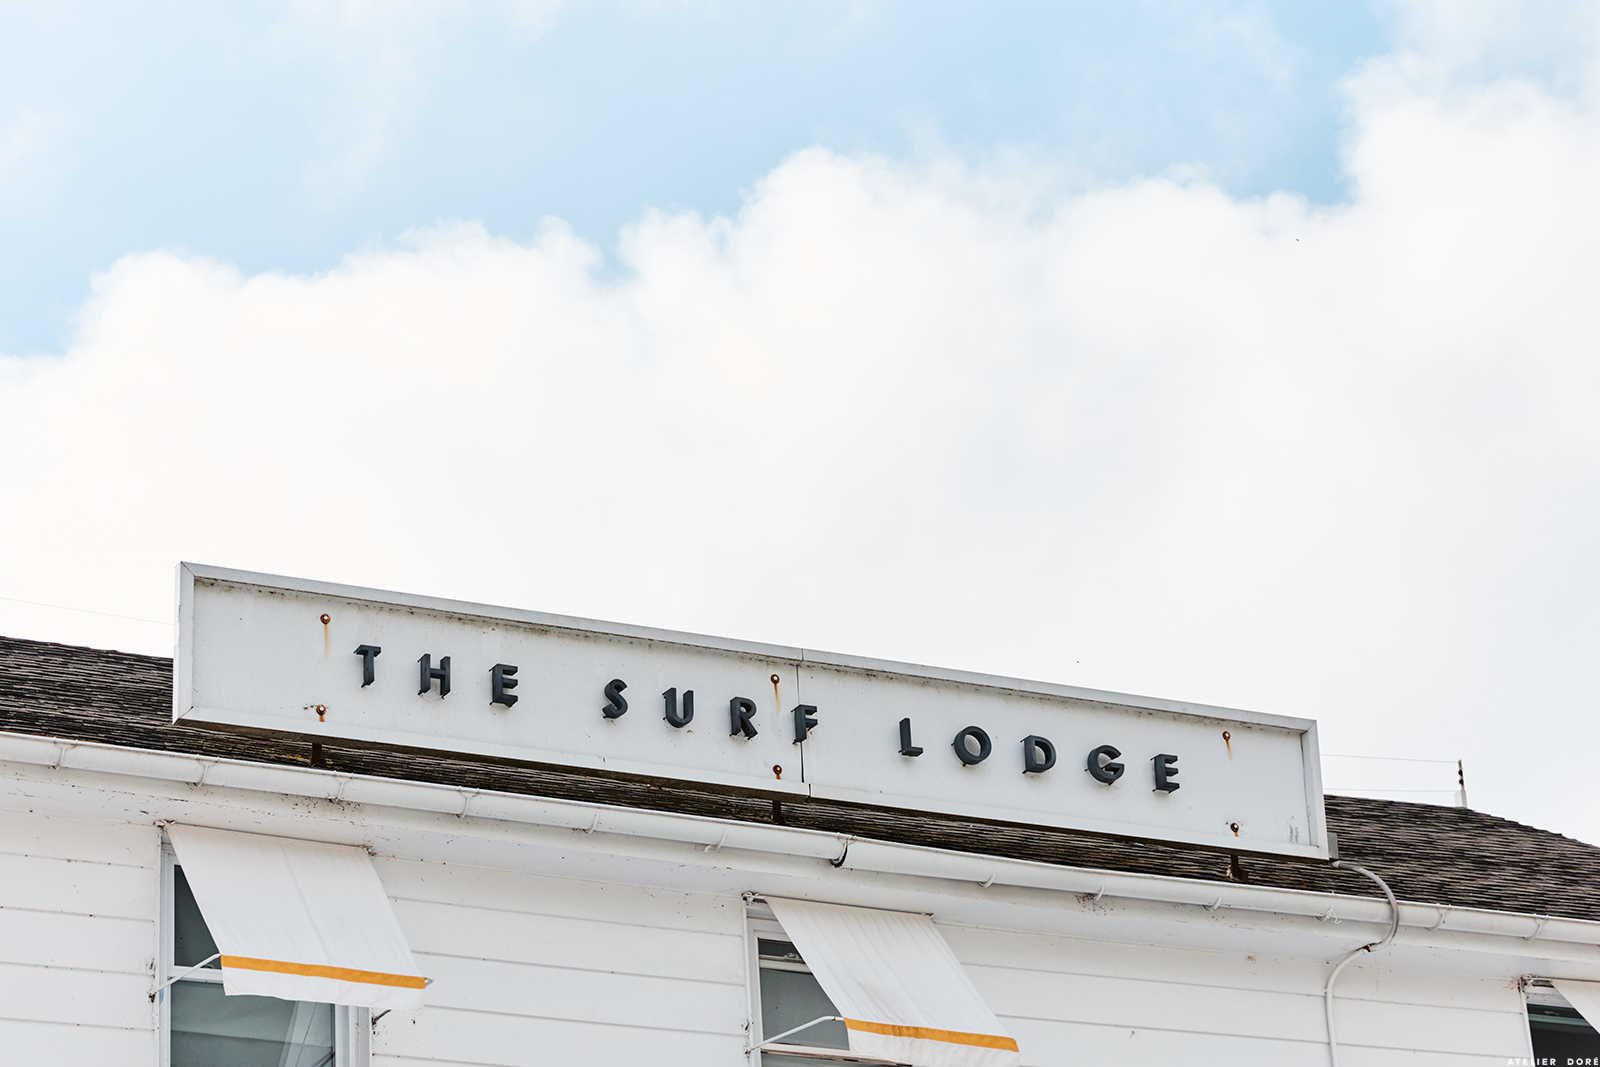 The Surf Lodge